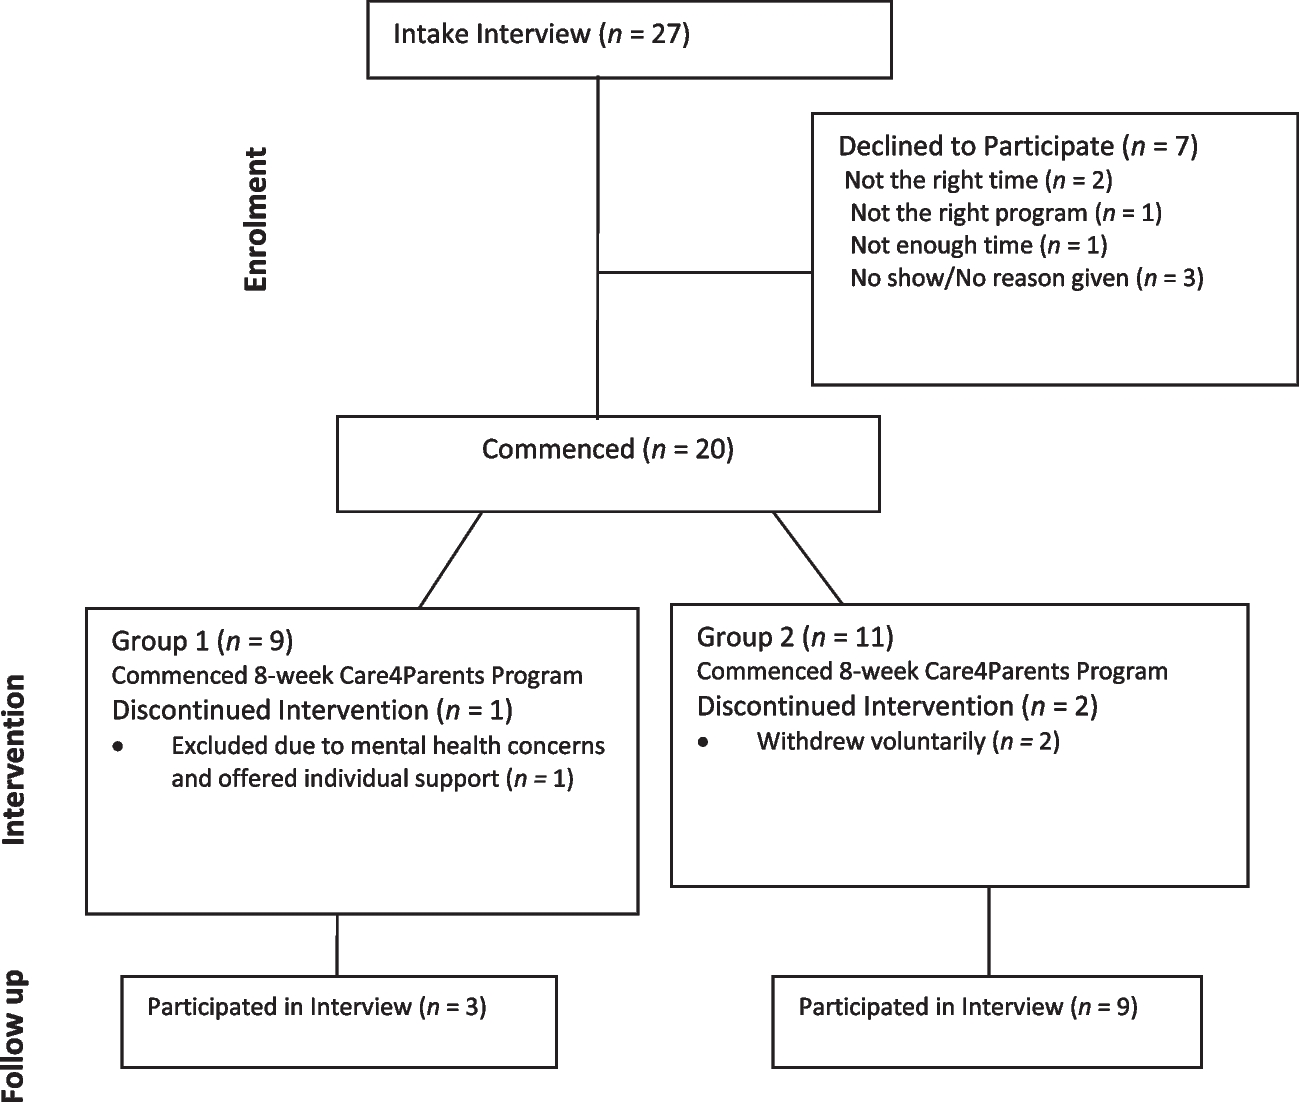 Care4Parents: An Evaluation of an Online Mindful Parenting Program for Caregivers of Children with 22q11.2 Deletion Syndrome